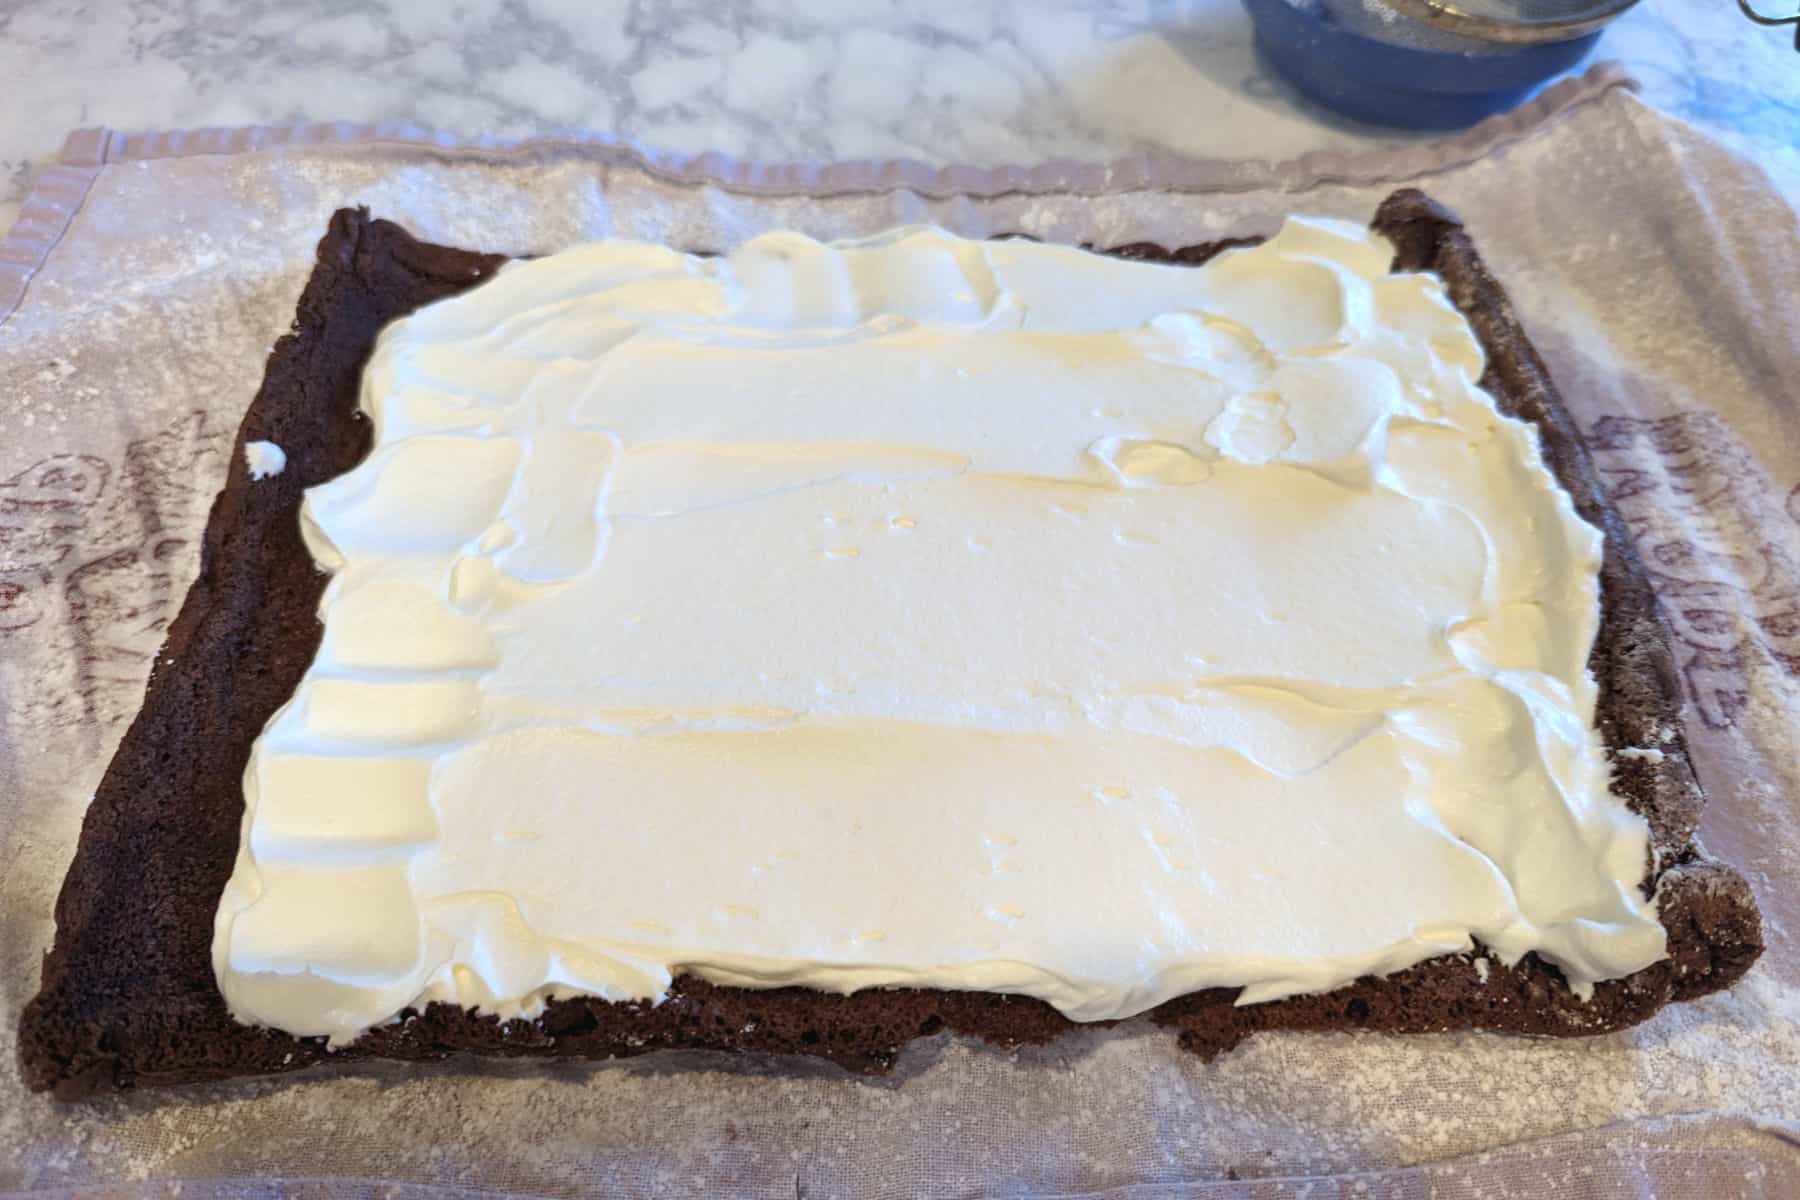 whipped cream spread on a chocolate cake, leaving a ½ inch gaps along the side, and 1 inch gap at the end